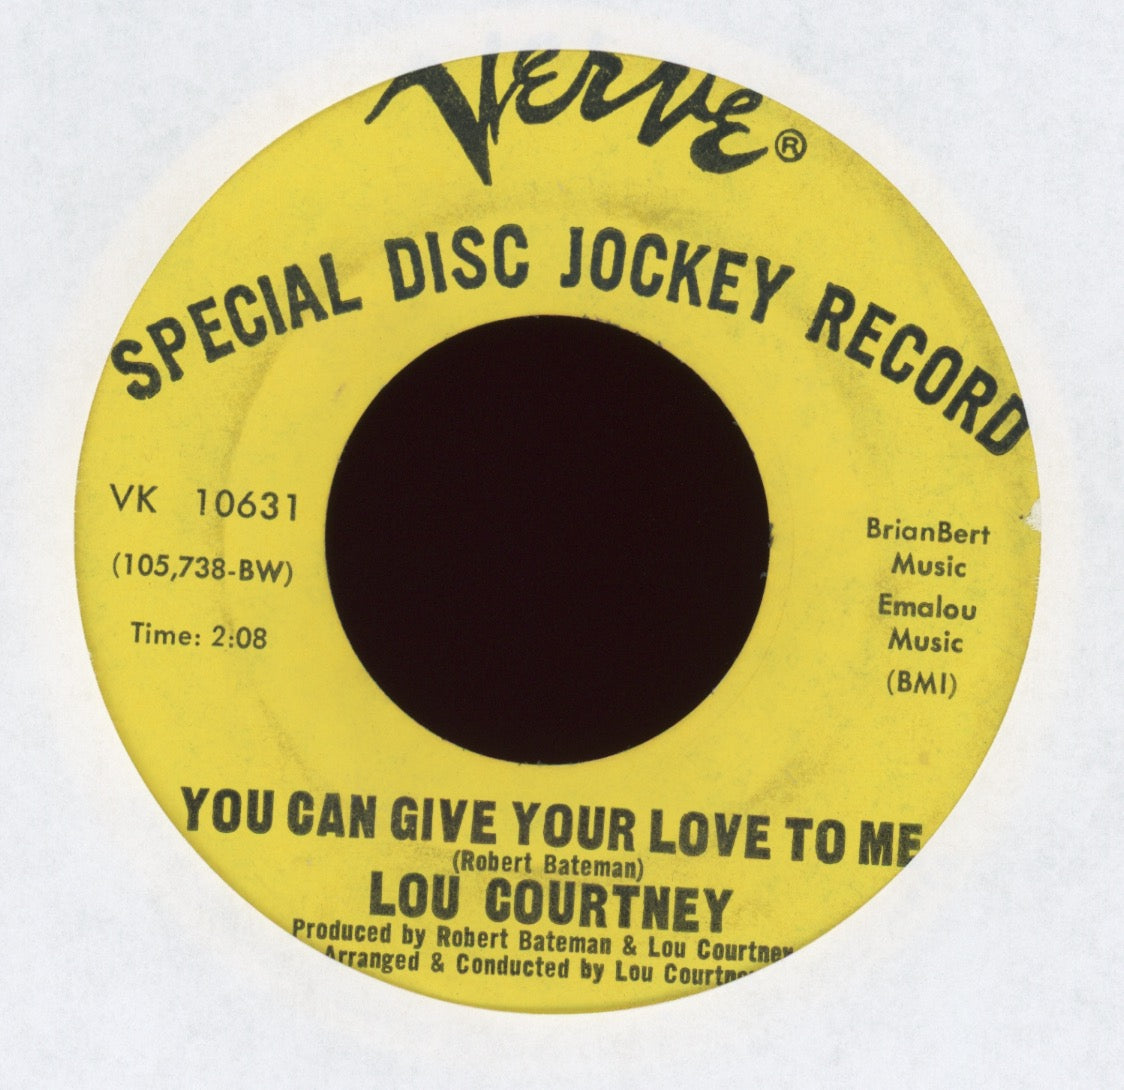 Lou Courtney - You Can Give Your Love To Me on Verve Promo